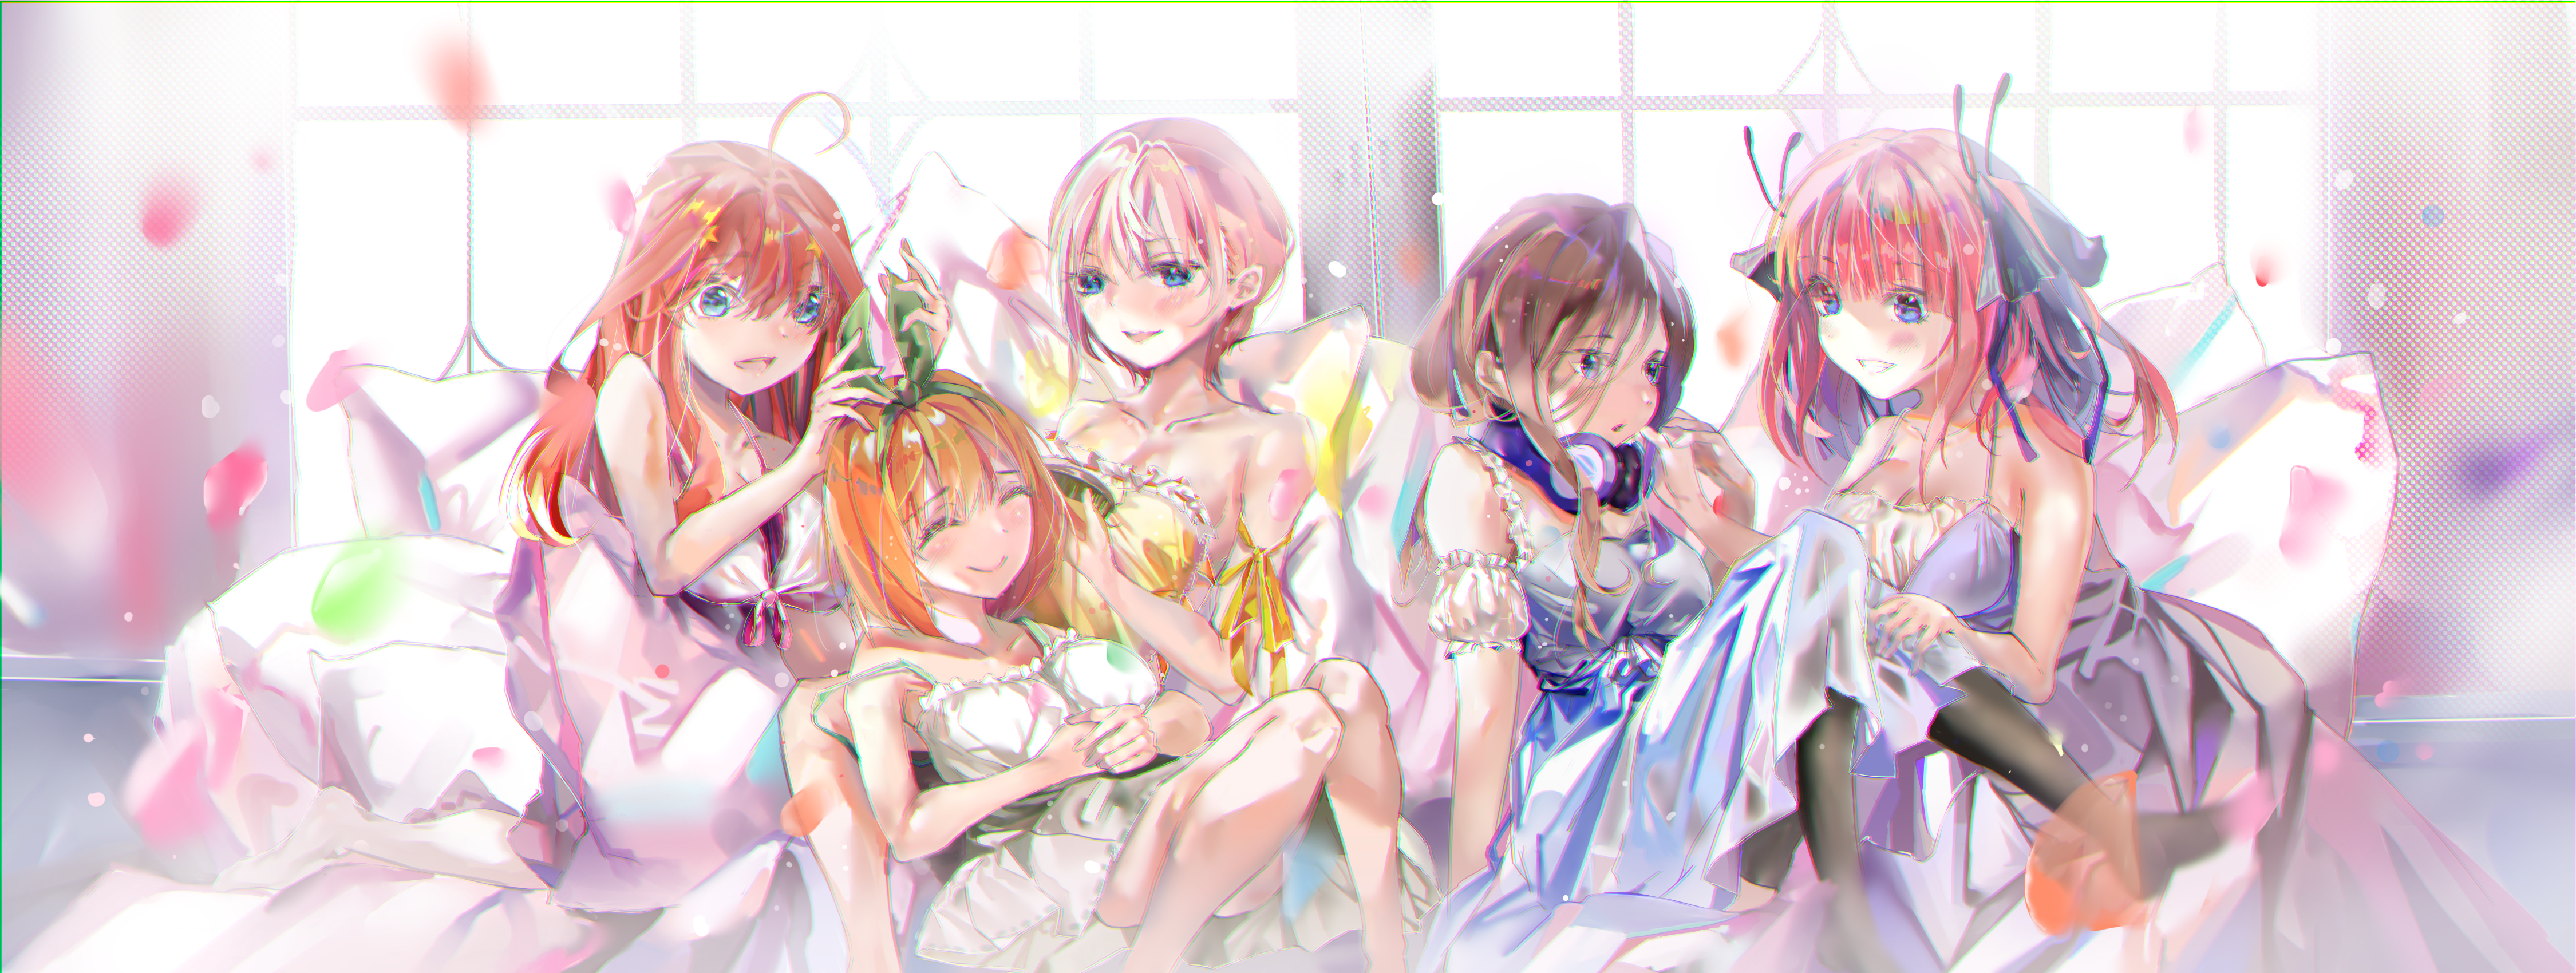 Anime The Quintessential Quintuplets 4500x1700